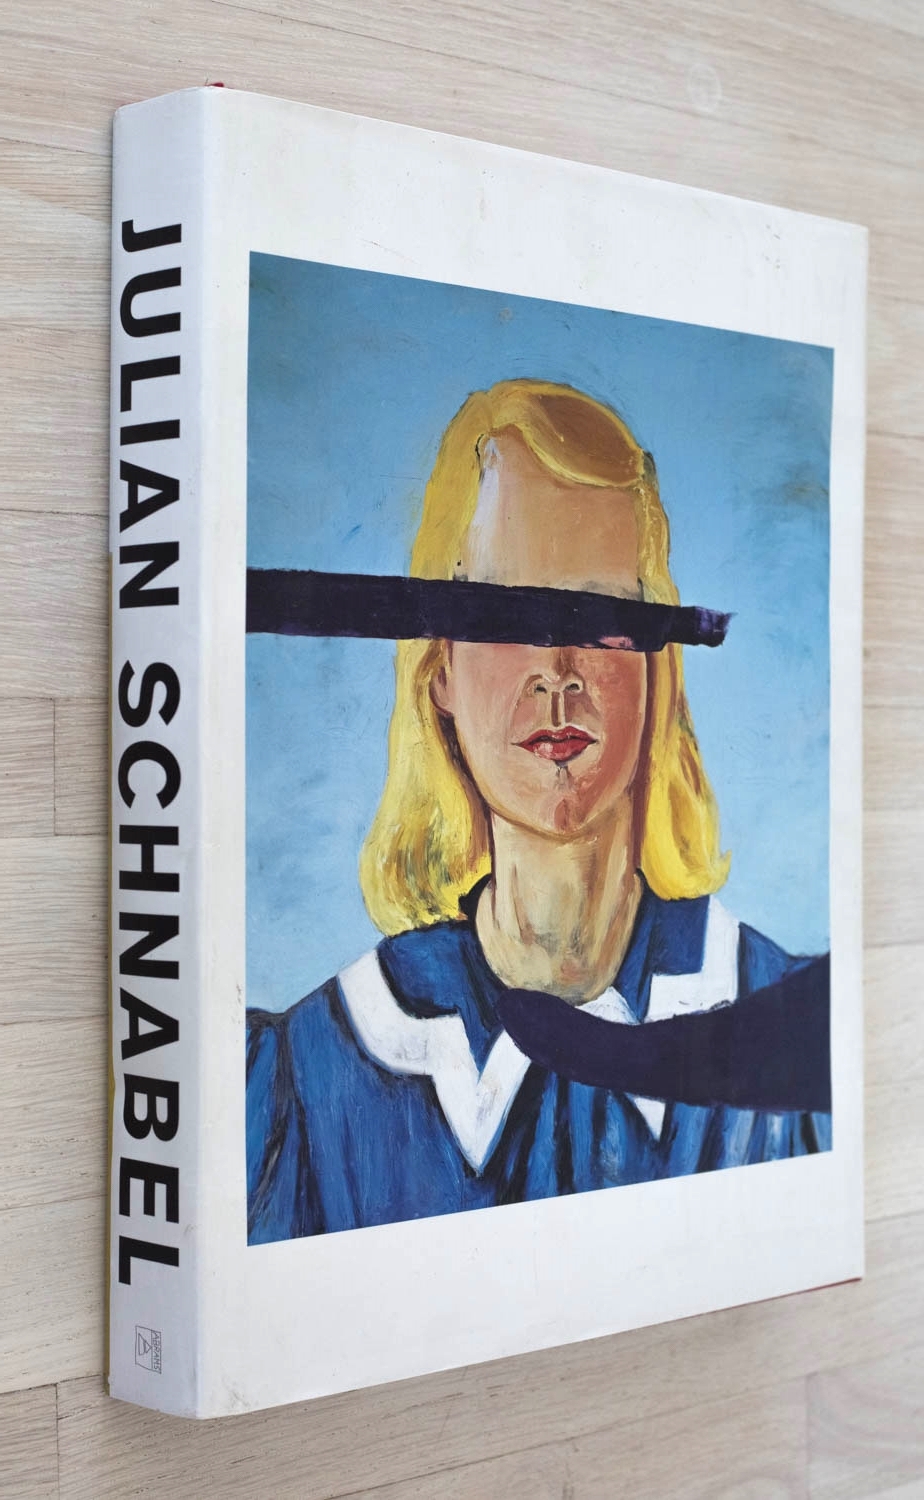   Julian Schnabel  Edited by Richard Olsen. Pandiscio Co, Graphic Design. Maria Pia Gramaglia, Production Manager. Harry N. Abrams, Inc., Publishers. 